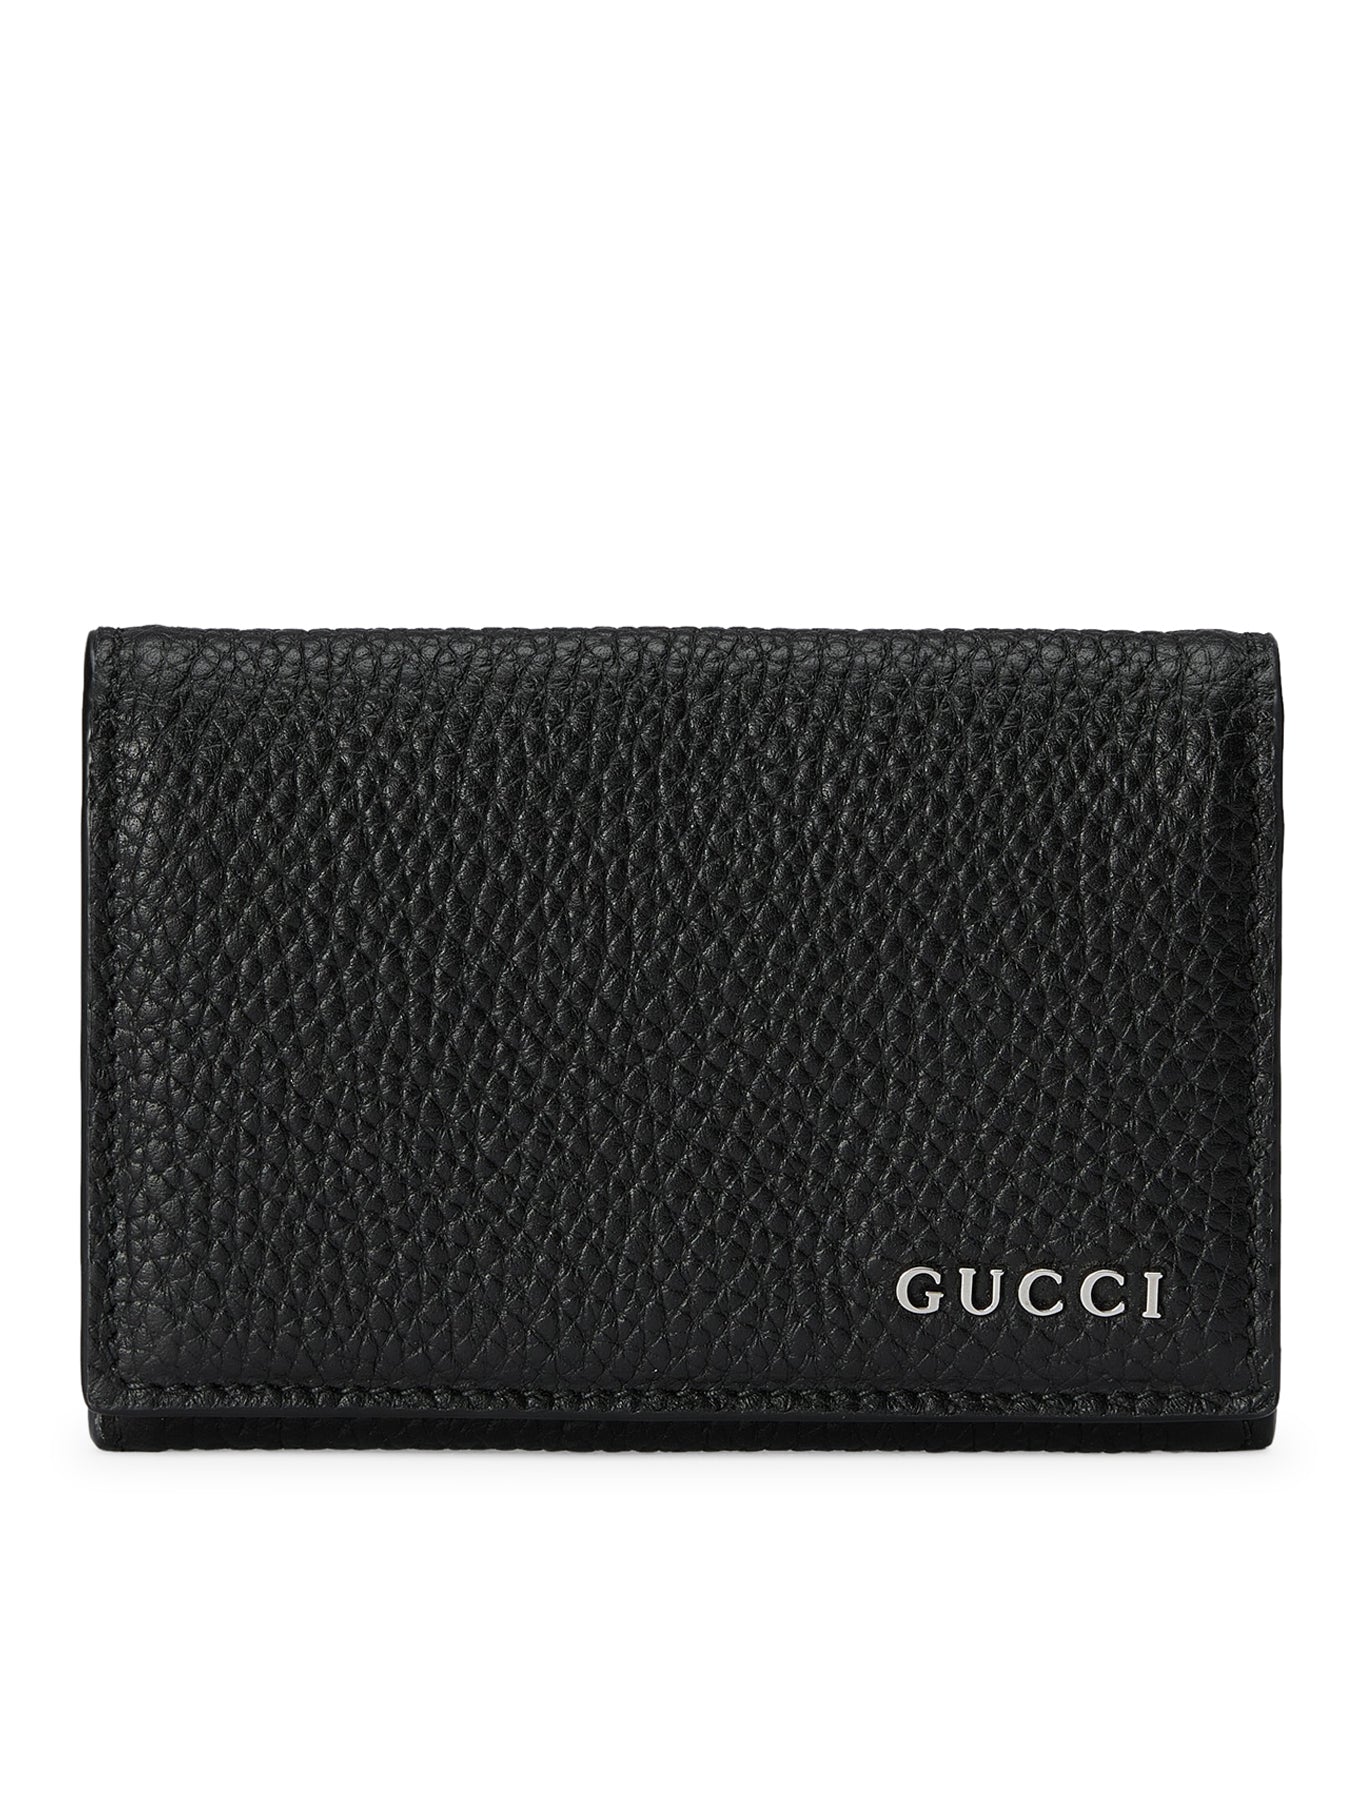 LONG CARD HOLDER WITH GUCCI LOGO